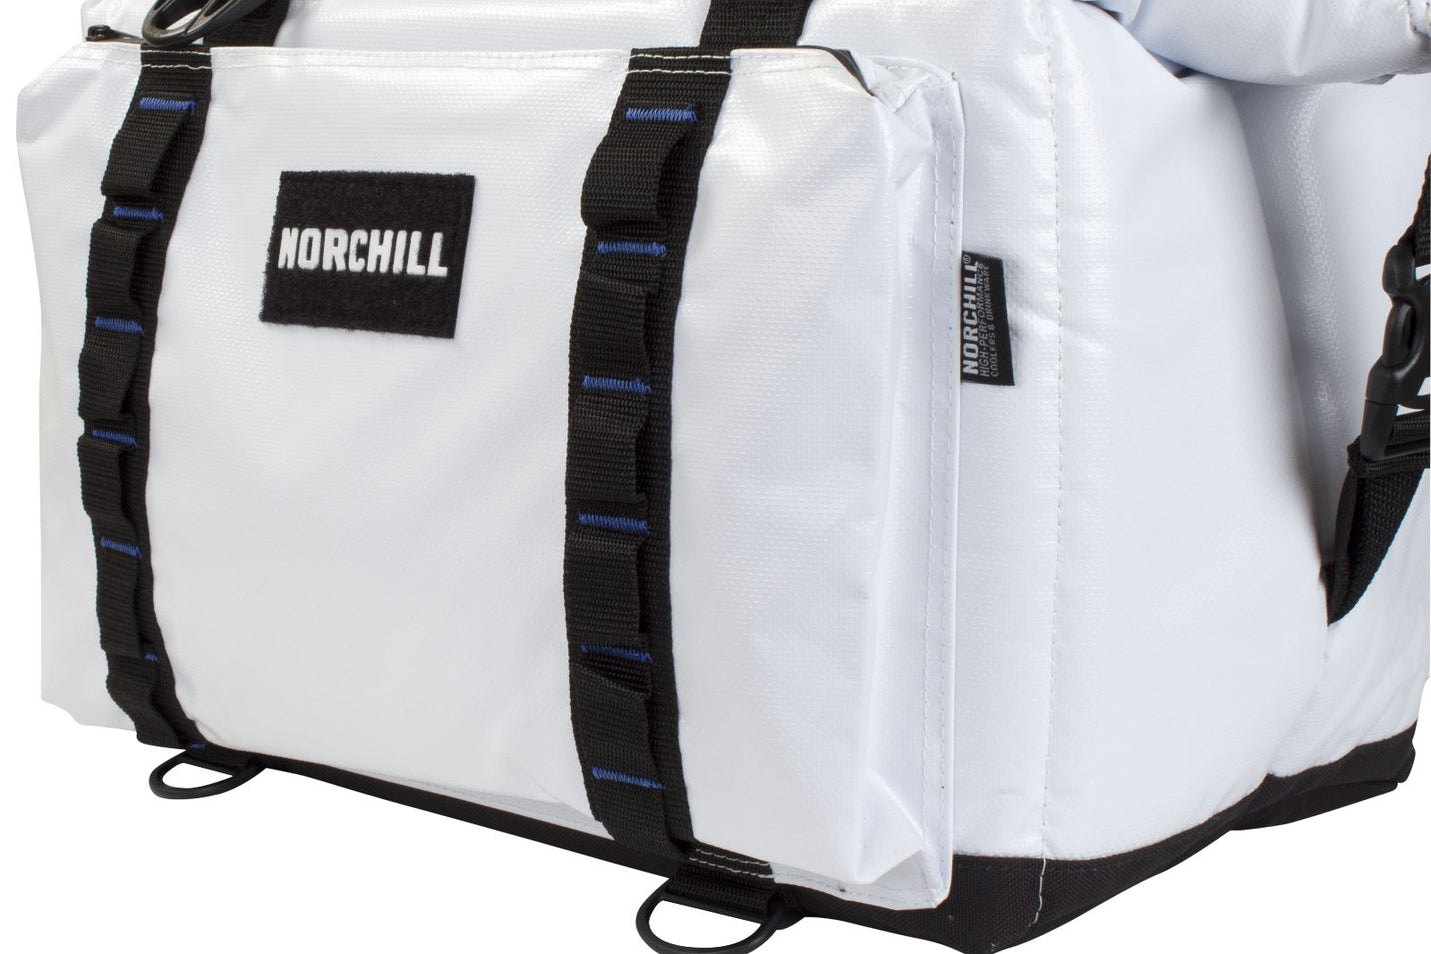 BoatBag xTreme Marine Coolers – NorChill® Coolers & Drinkware